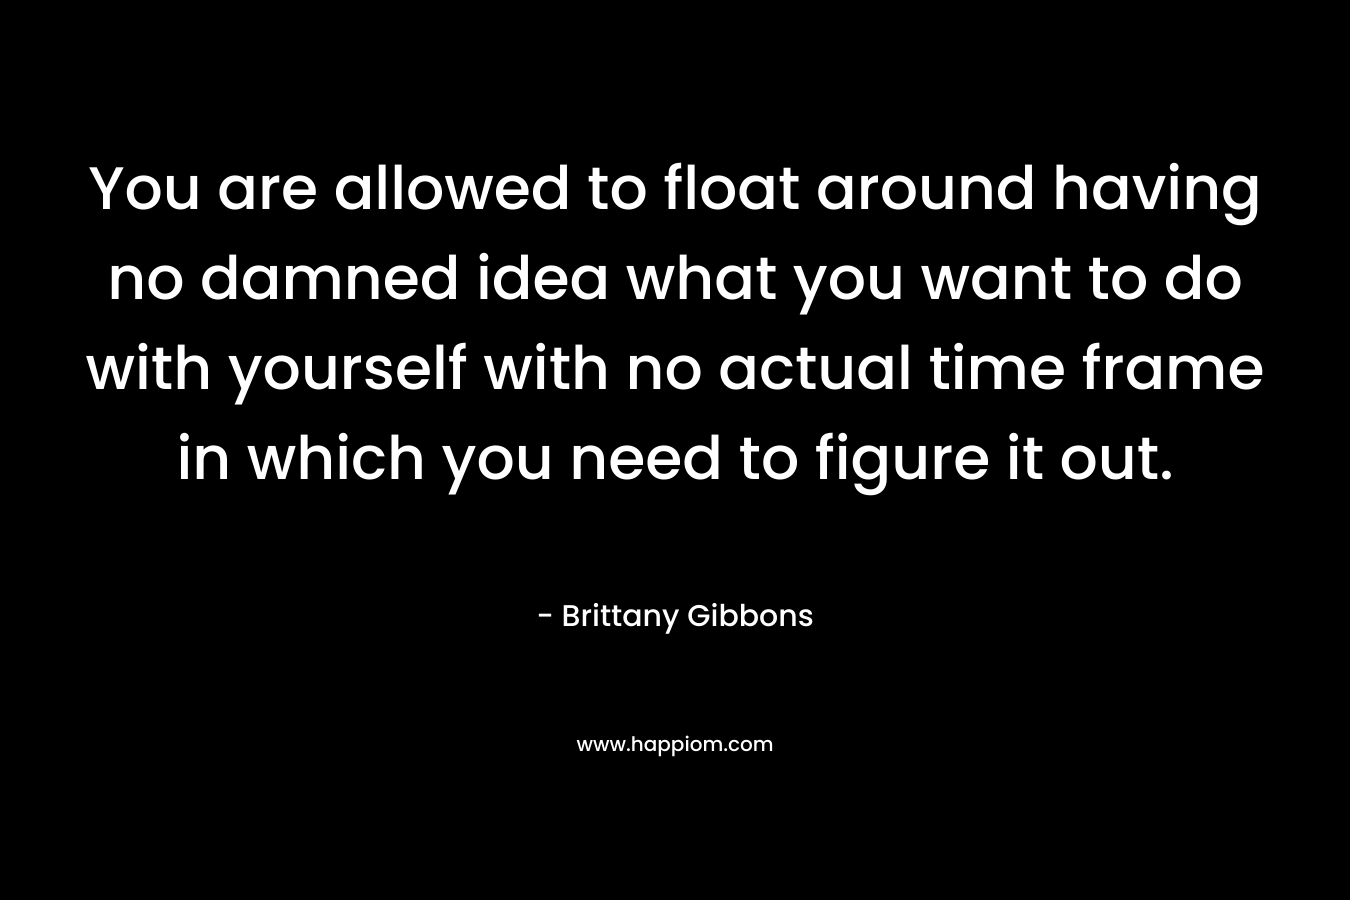 You are allowed to float around having no damned idea what you want to do with yourself with no actual time frame in which you need to figure it out. – Brittany Gibbons